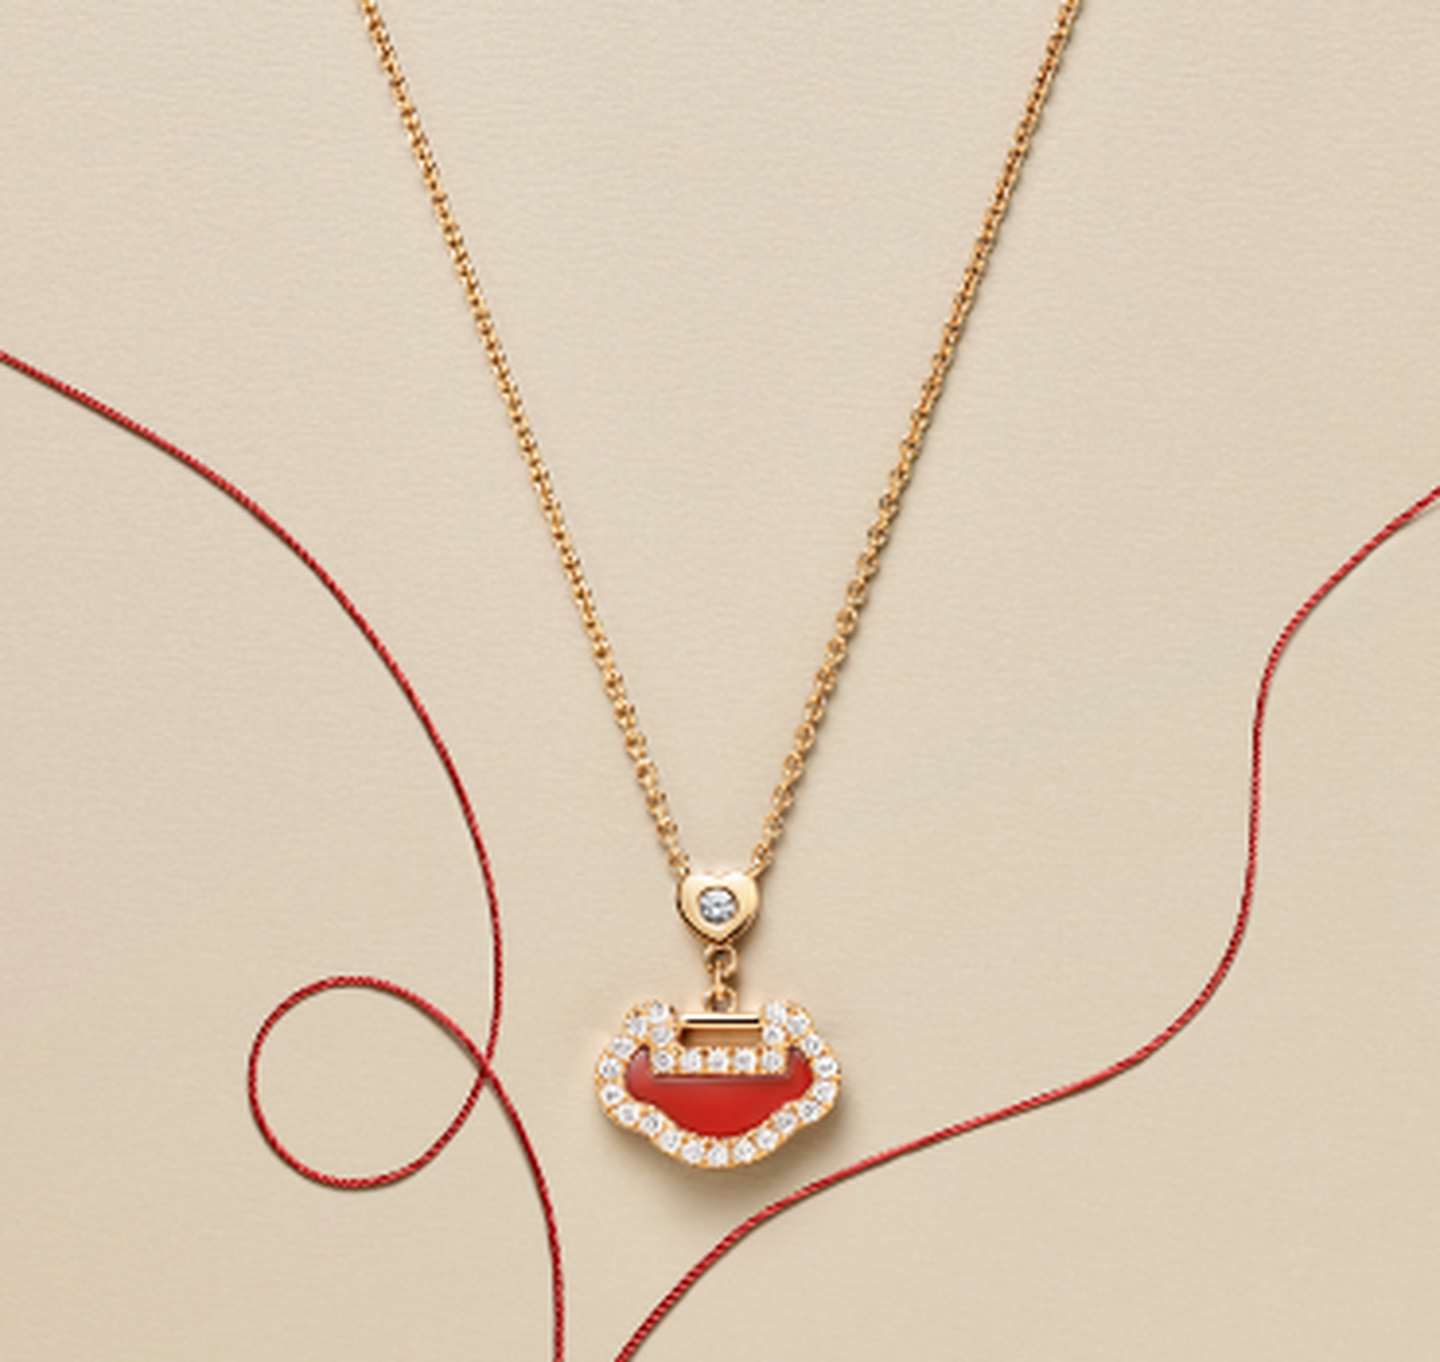 A Qeelin Yu Yi rose gold, red agate and diamond pendant on a beige background.